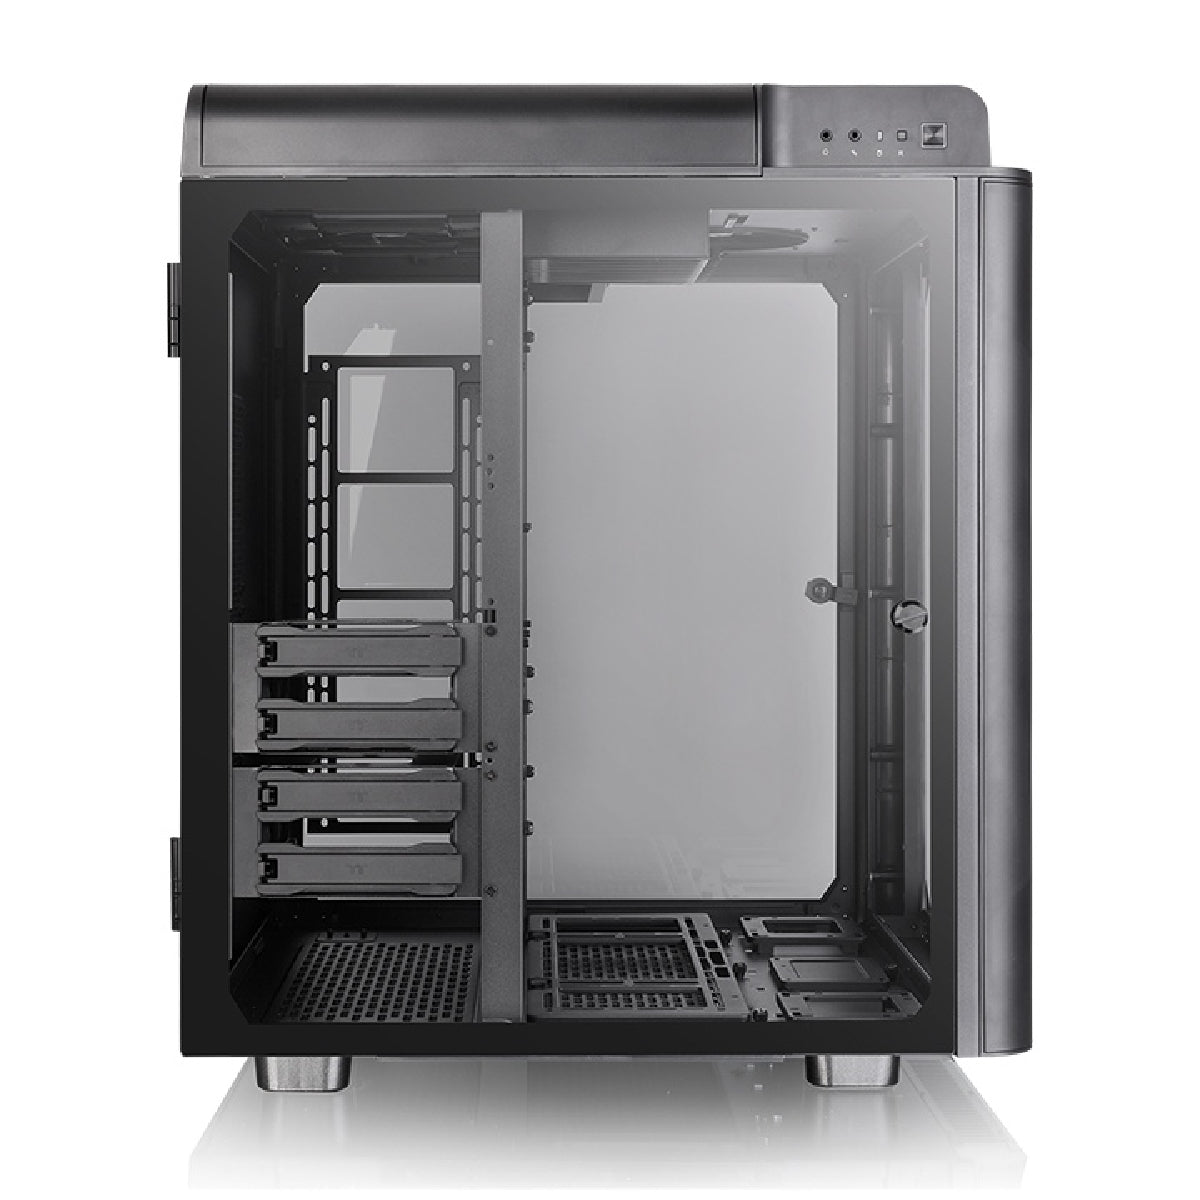 Thermaltake Level 20 HT E-ATX Full Tower Chassis - Store 974 | ستور ٩٧٤